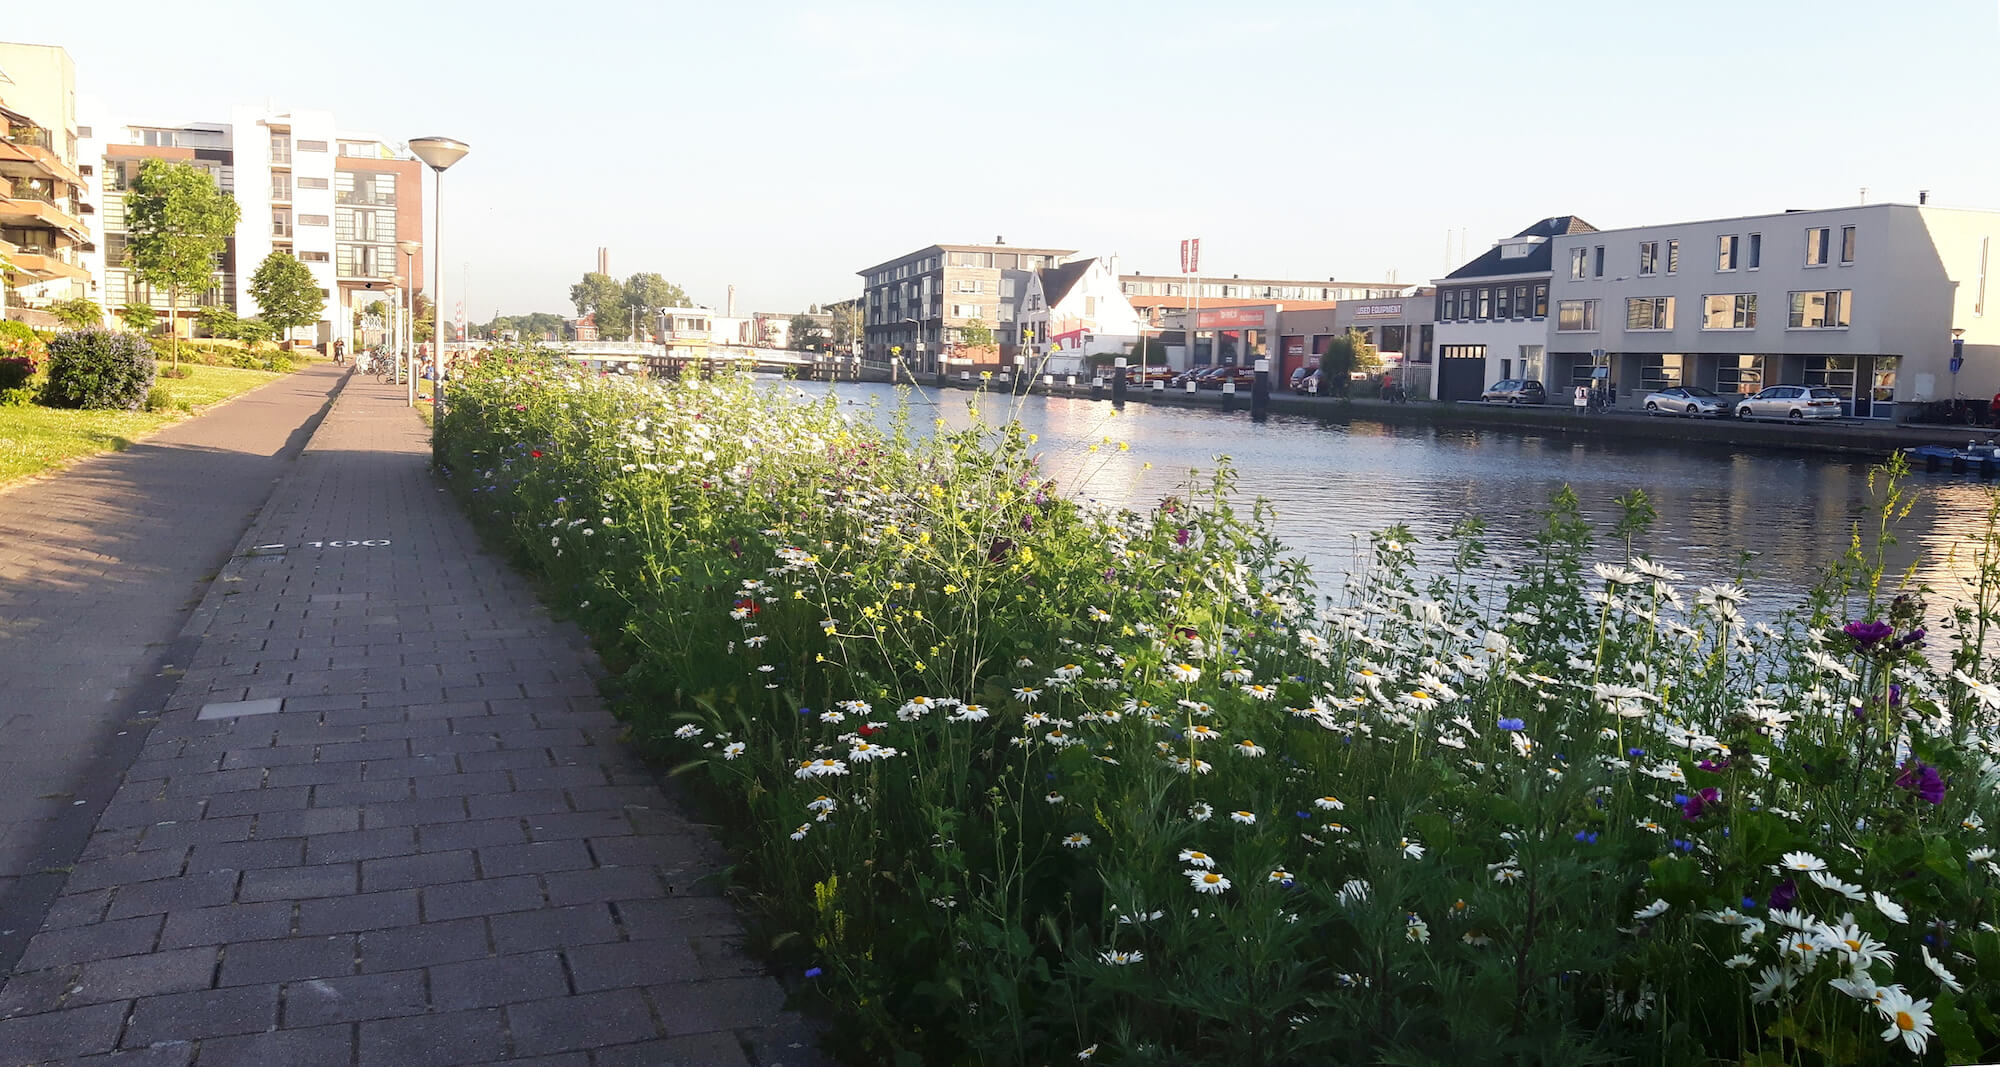 Wildflower strips along canals. Delft, The Netherlands